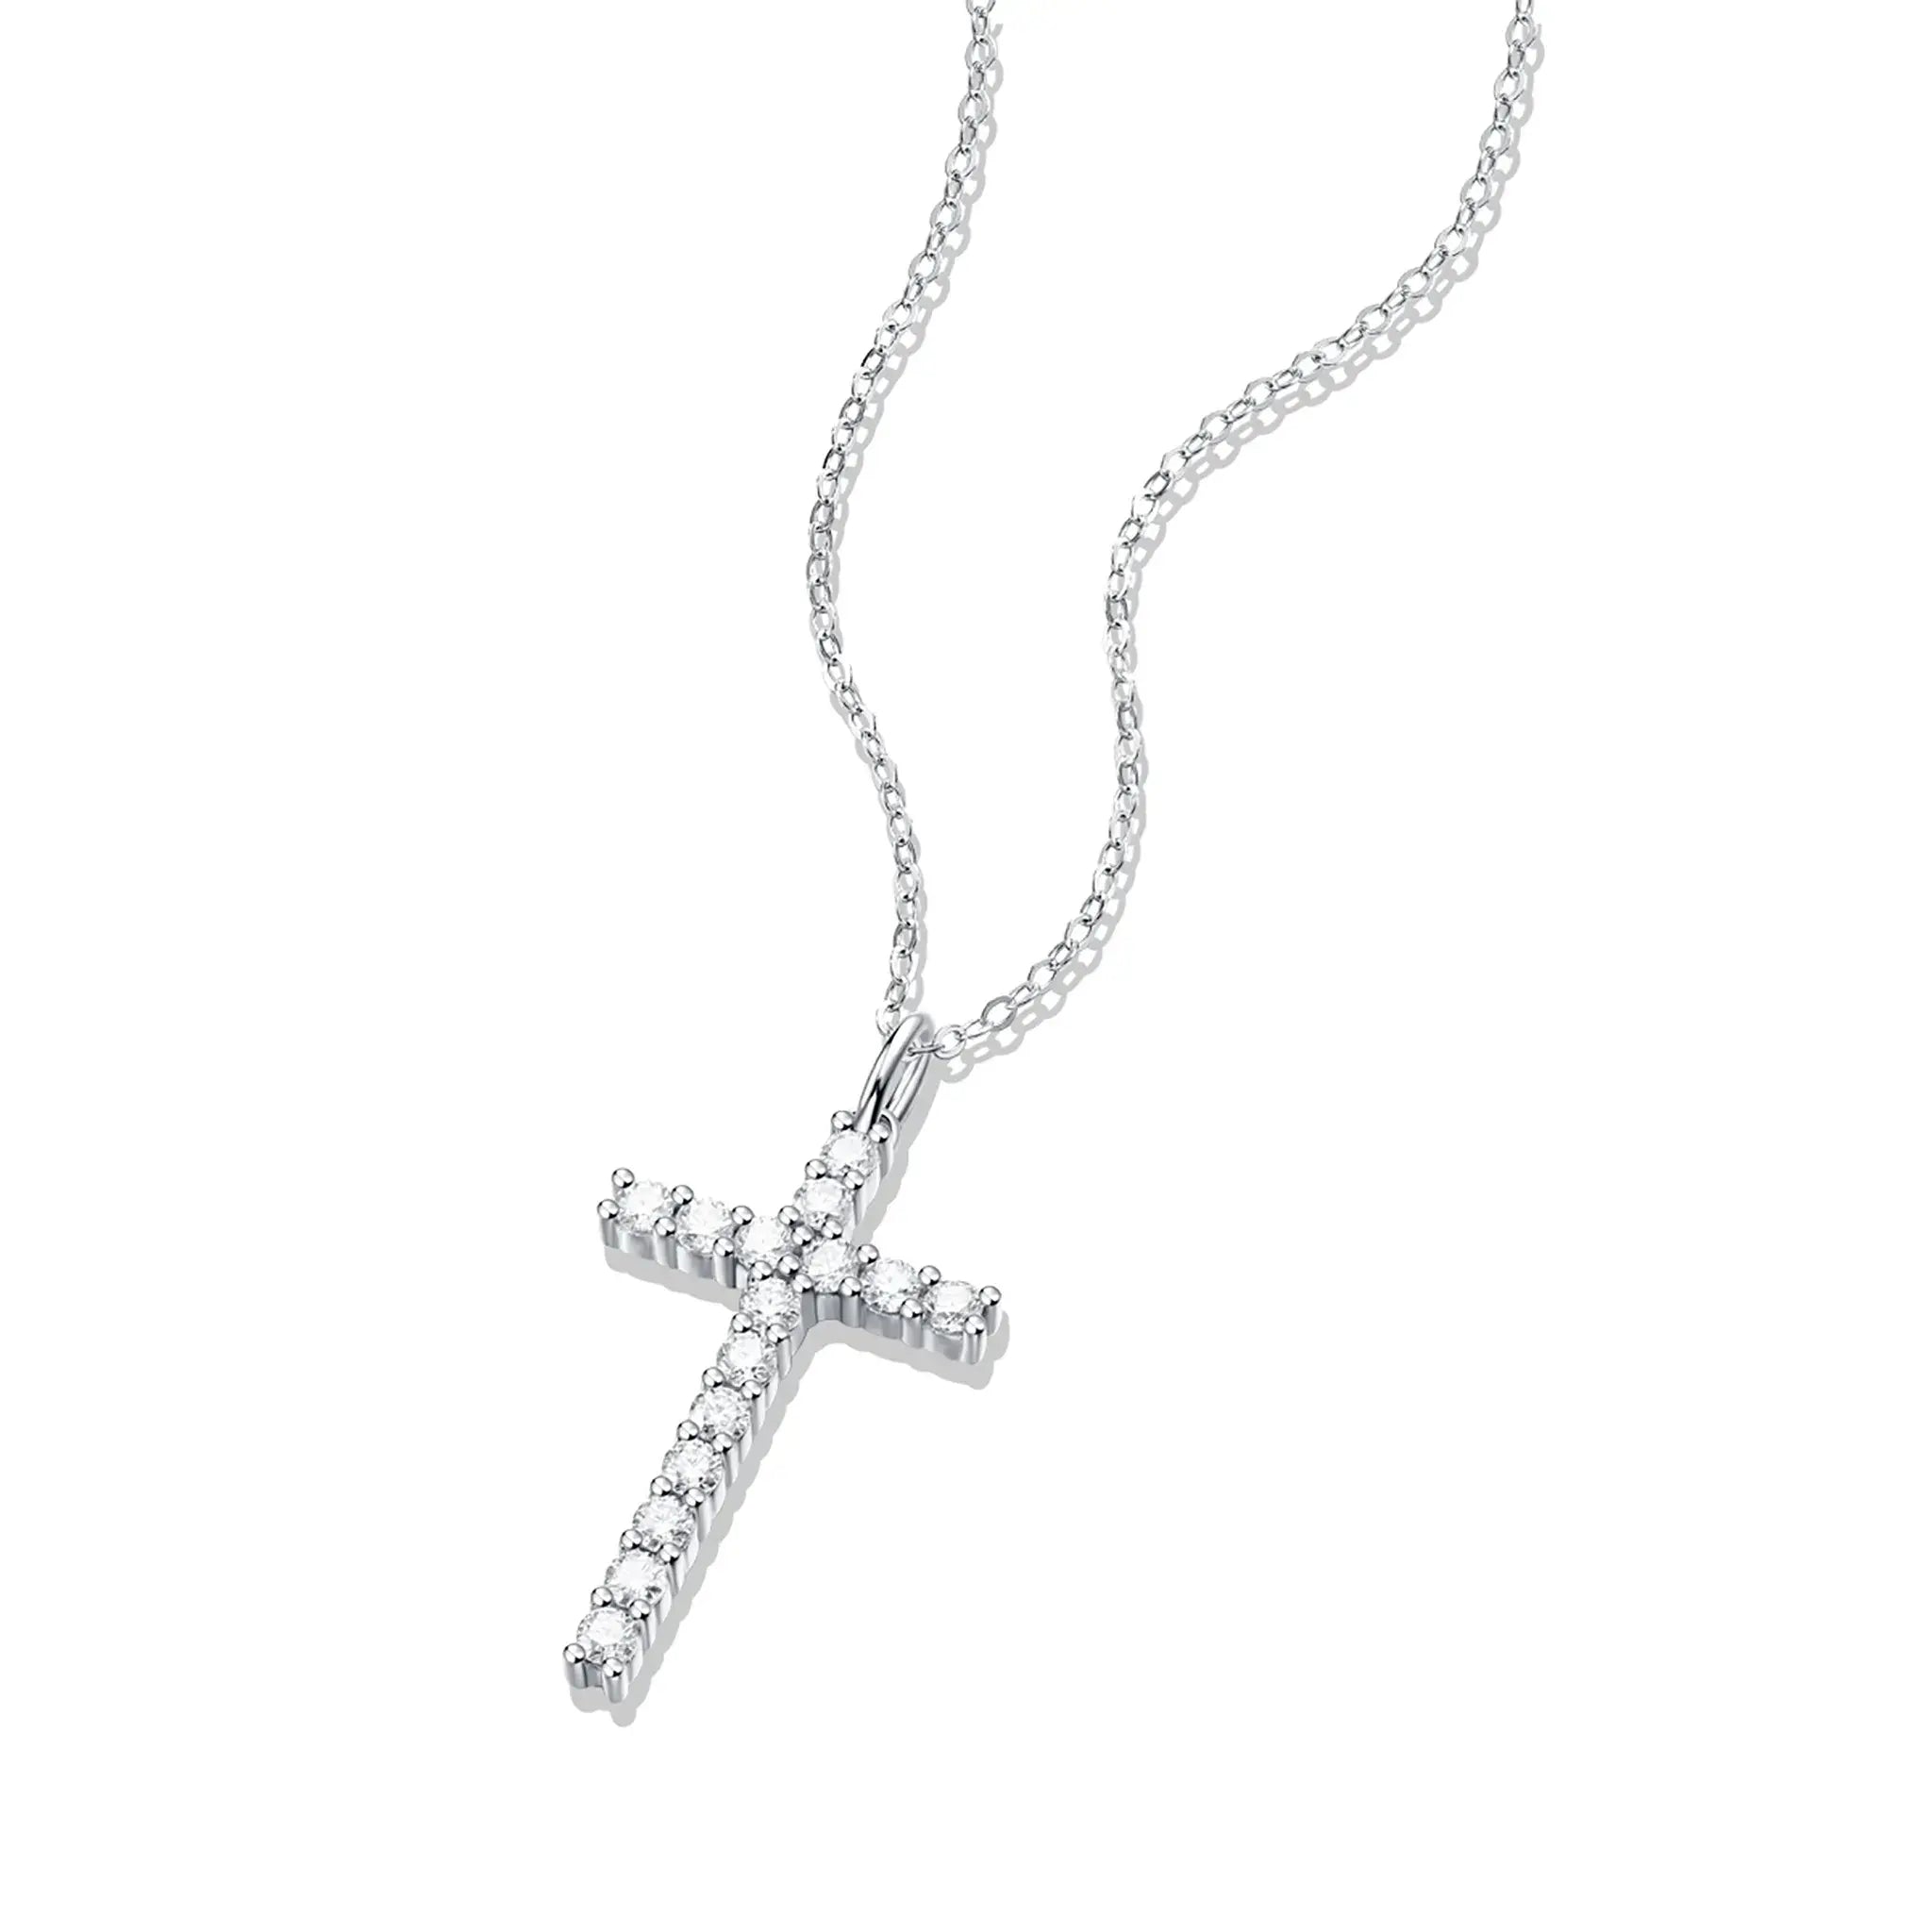 Belief-Moissanite-Sterling-Silver-Necklace-N18